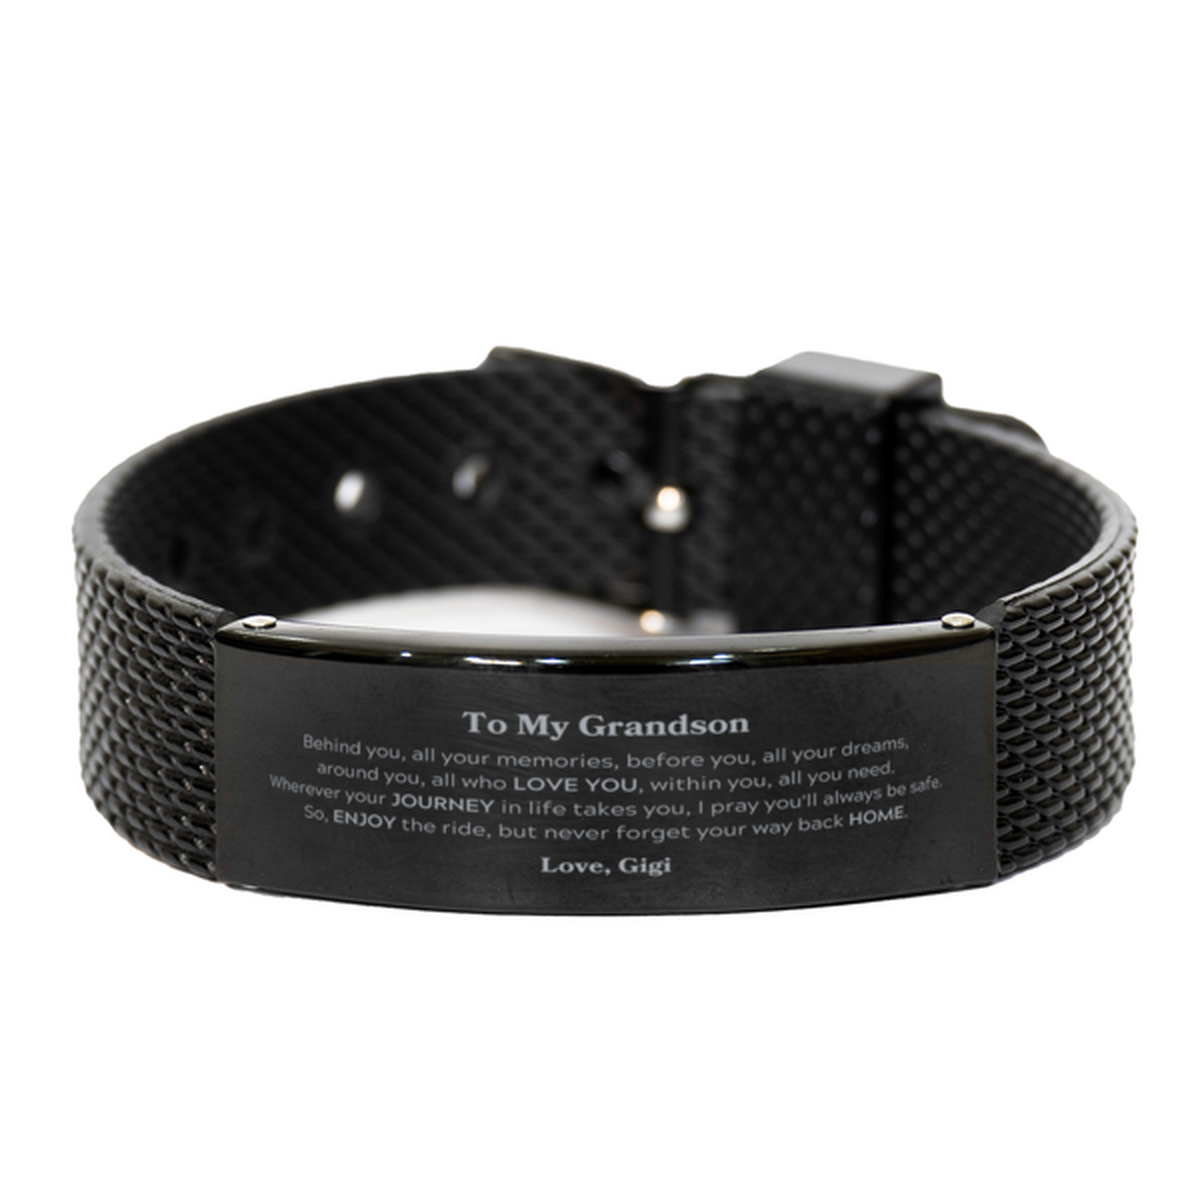 To My Grandson Graduation Gifts from Gigi, Grandson Black Shark Mesh Bracelet Christmas Birthday Gifts for Grandson Behind you, all your memories, before you, all your dreams. Love, Gigi